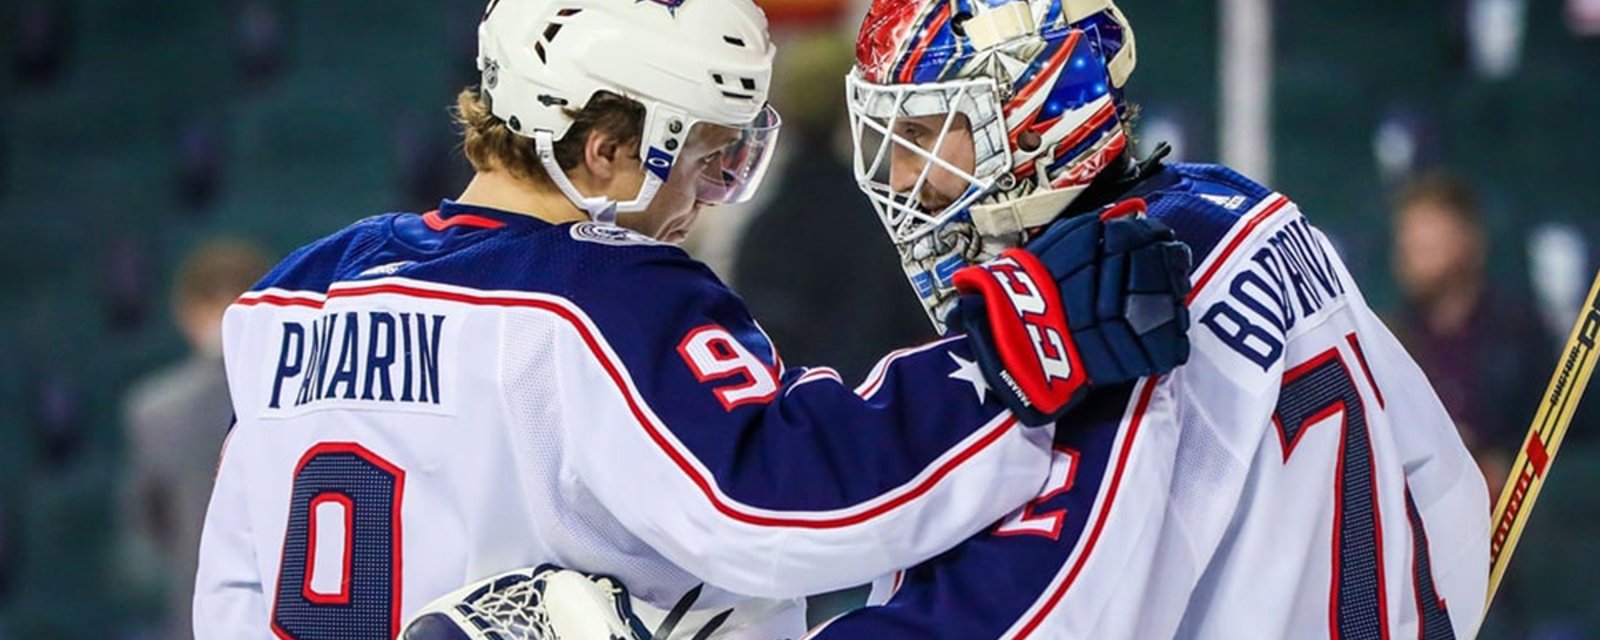 Report: Eastern Conference rival linked to both Panarin AND Bobrovsky